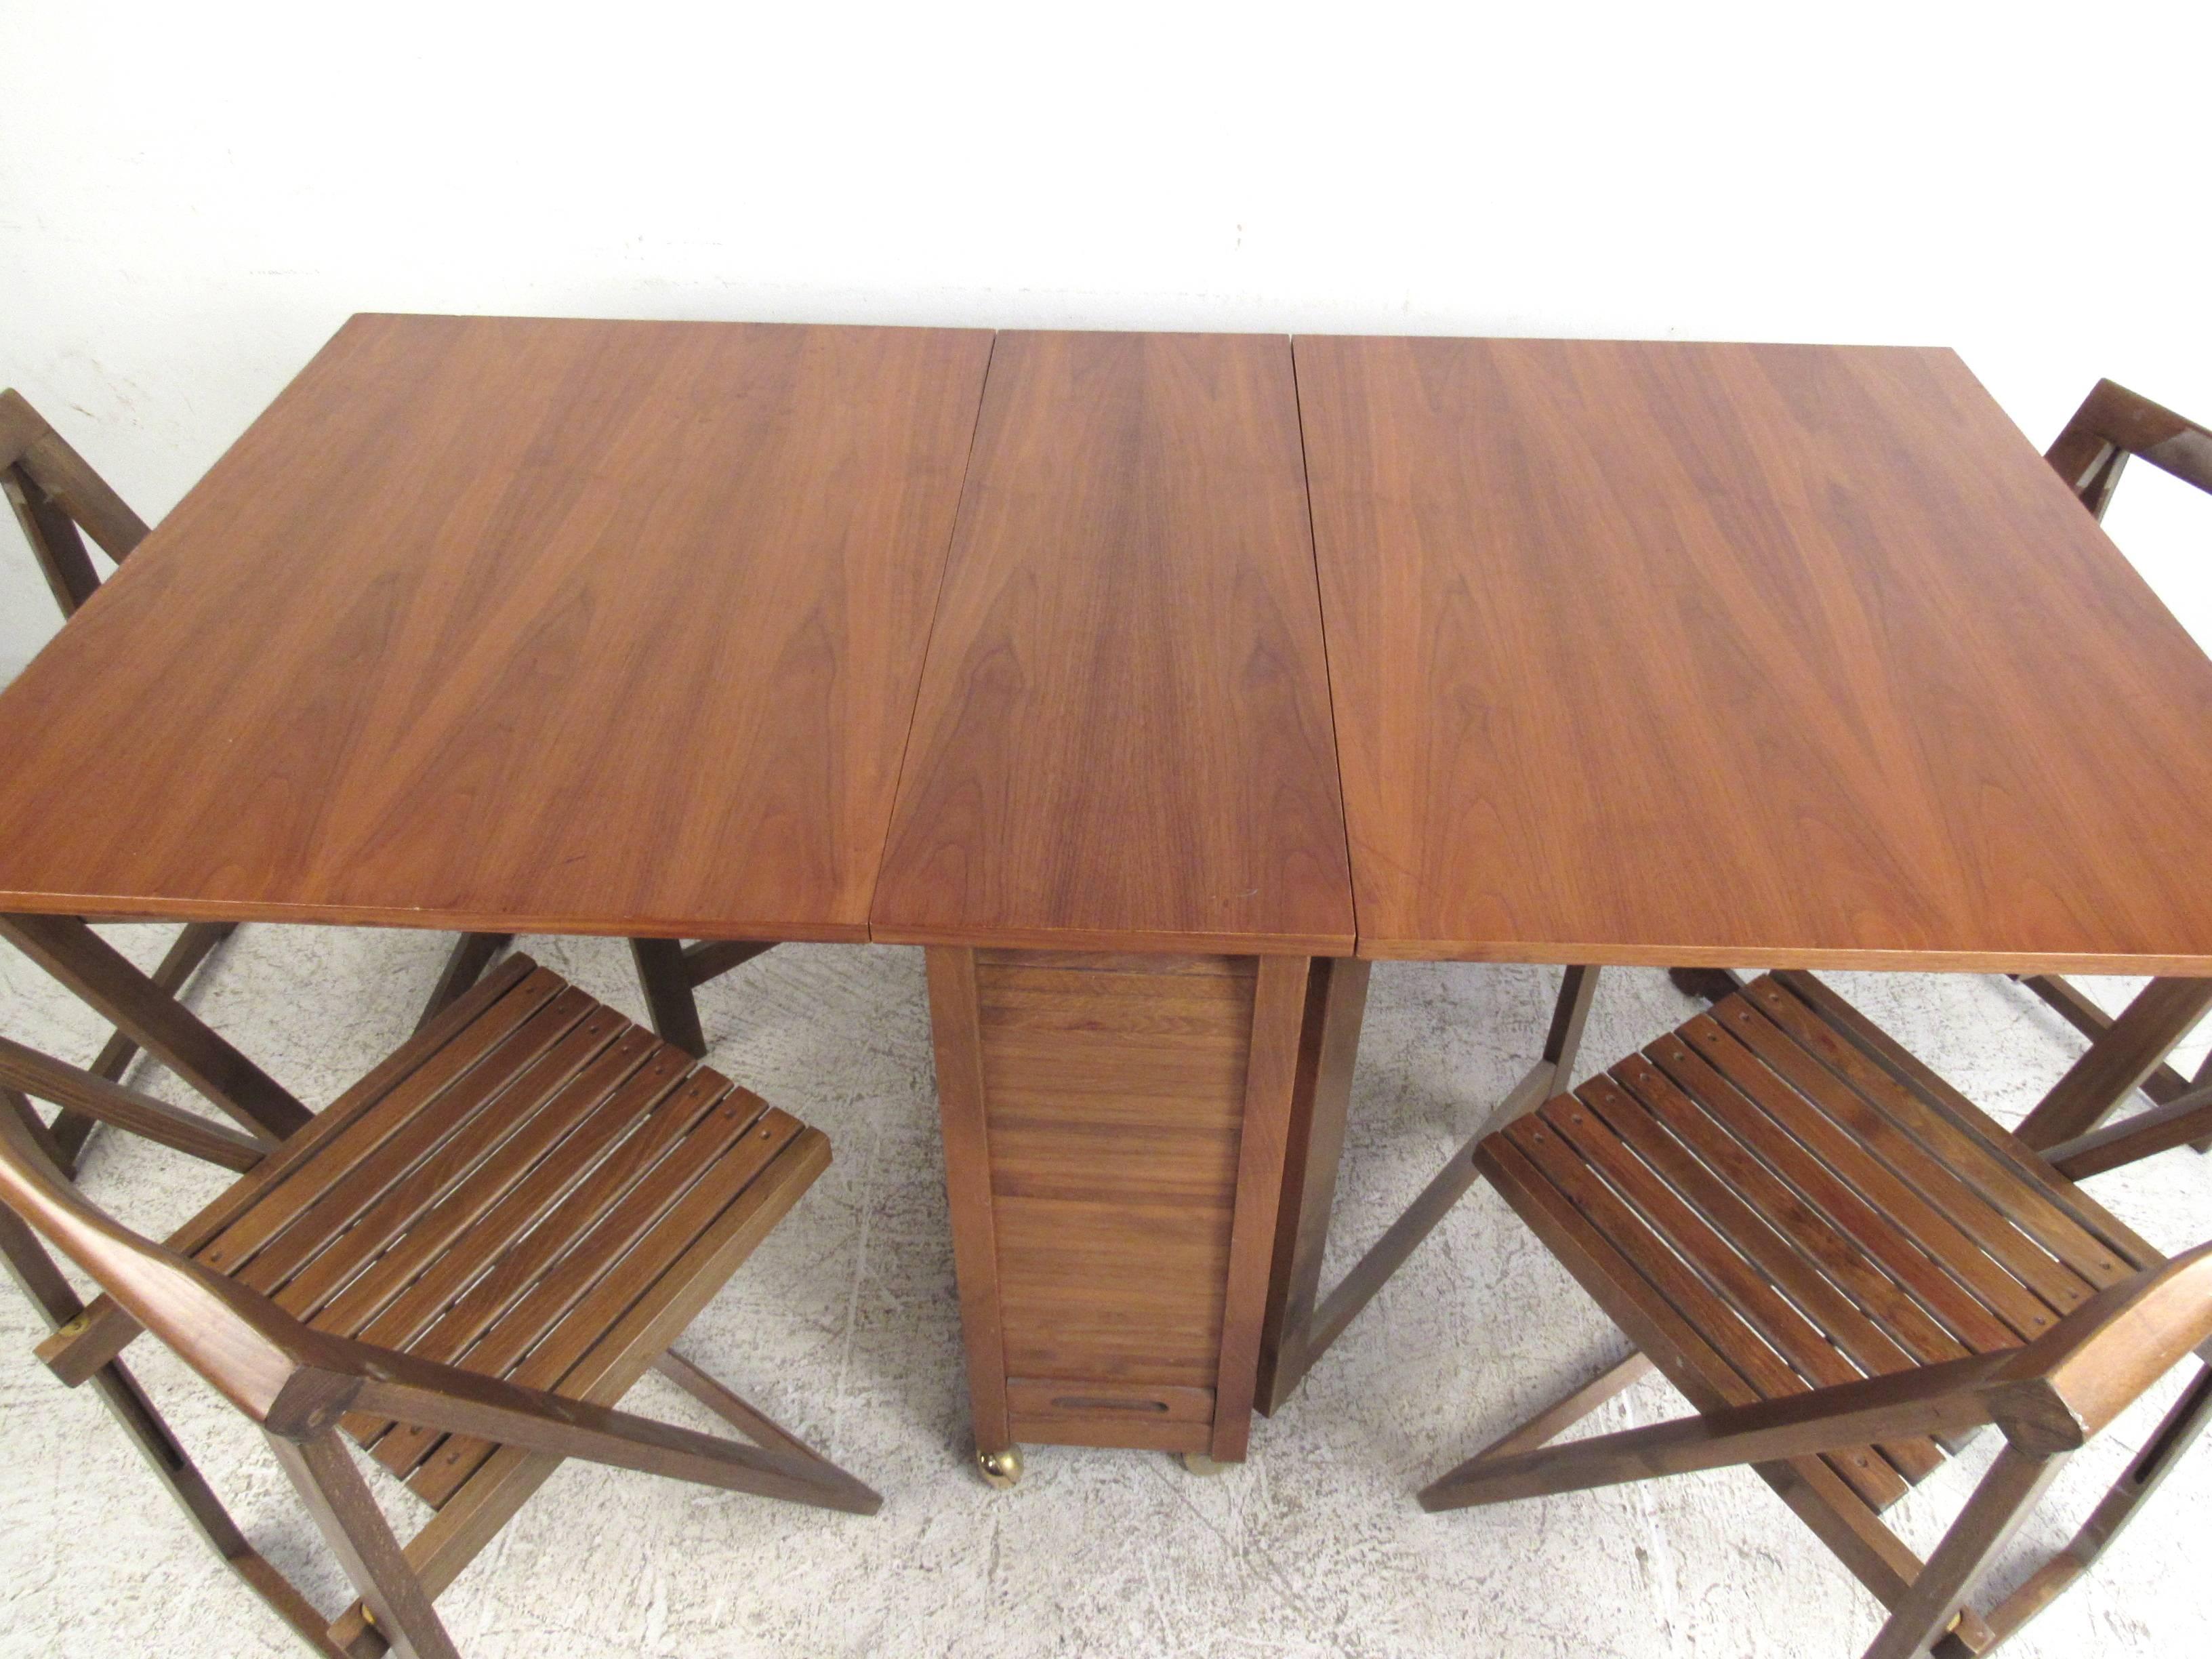 Danish Mid-Century Modern Drop-Leaf Table with Chairs